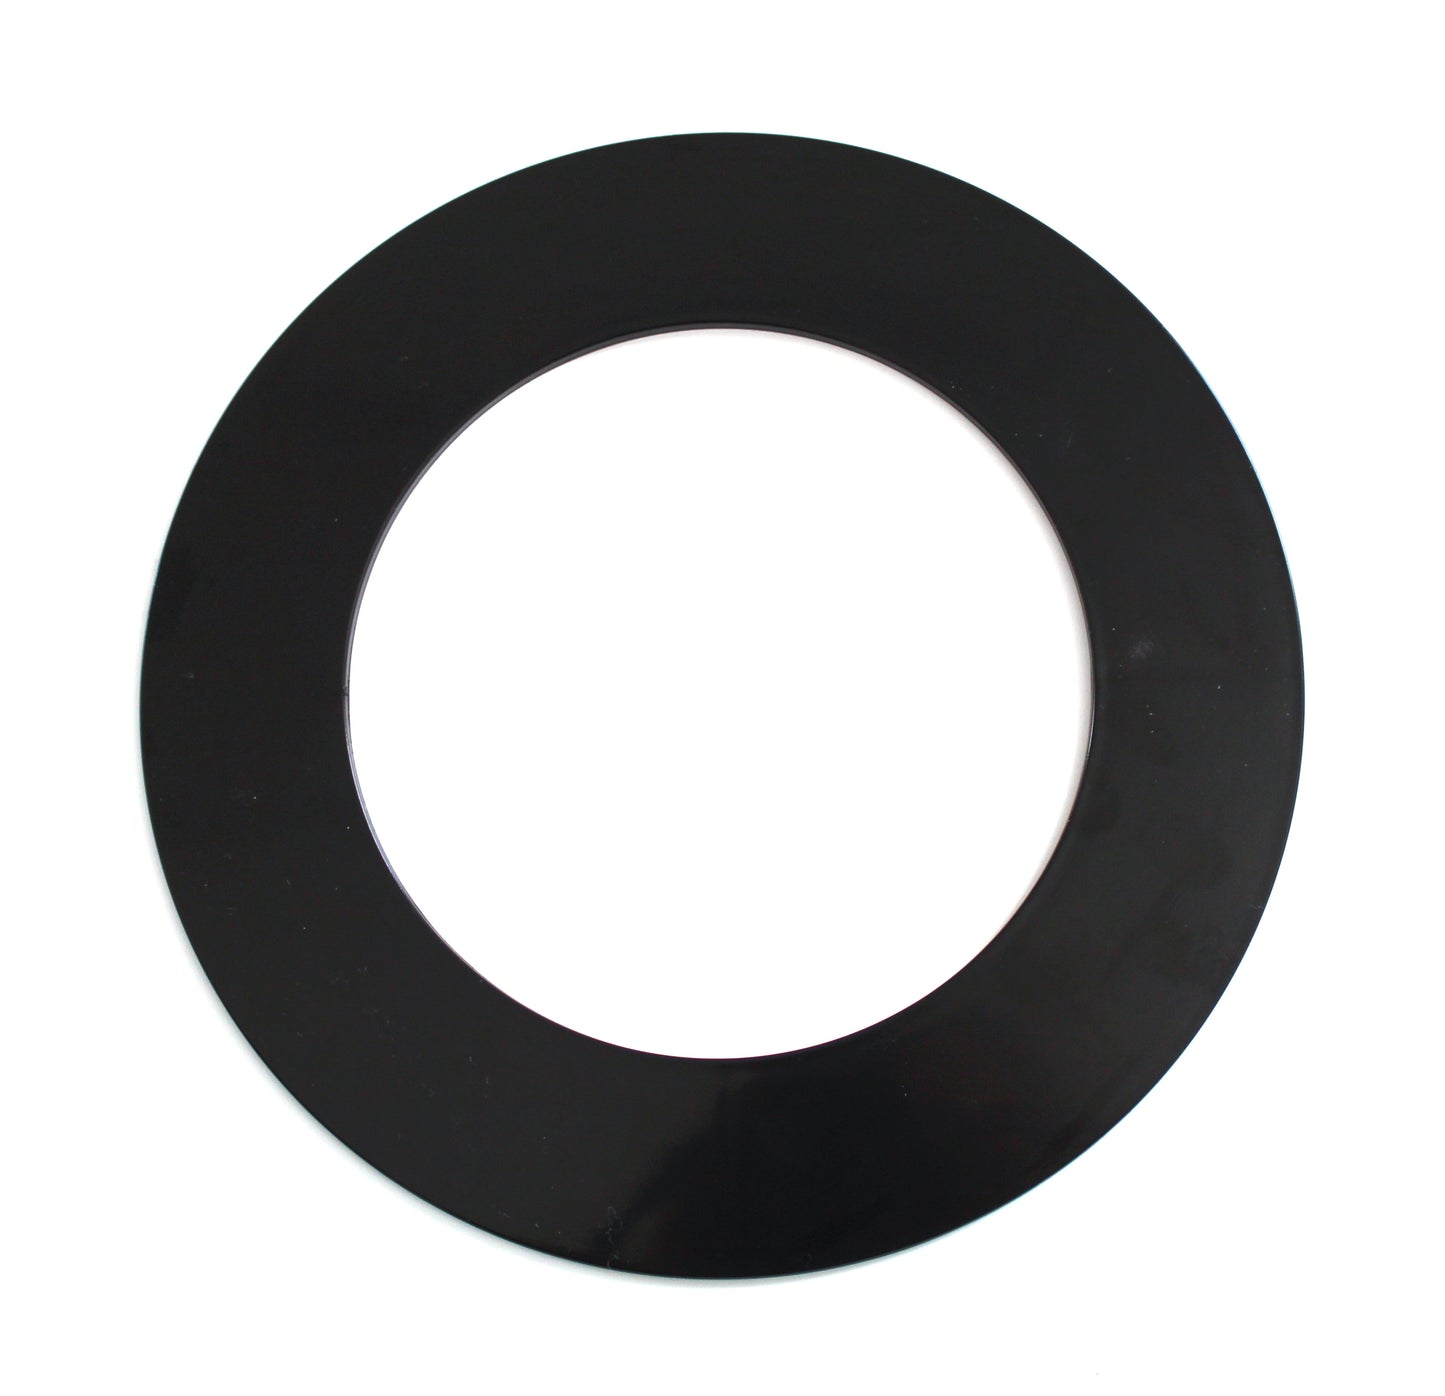 Trim Rings Plastic Ring 8" Inch Recessed Light Ring For Can Lights Lightening Fixture Multi-Colors Black or White